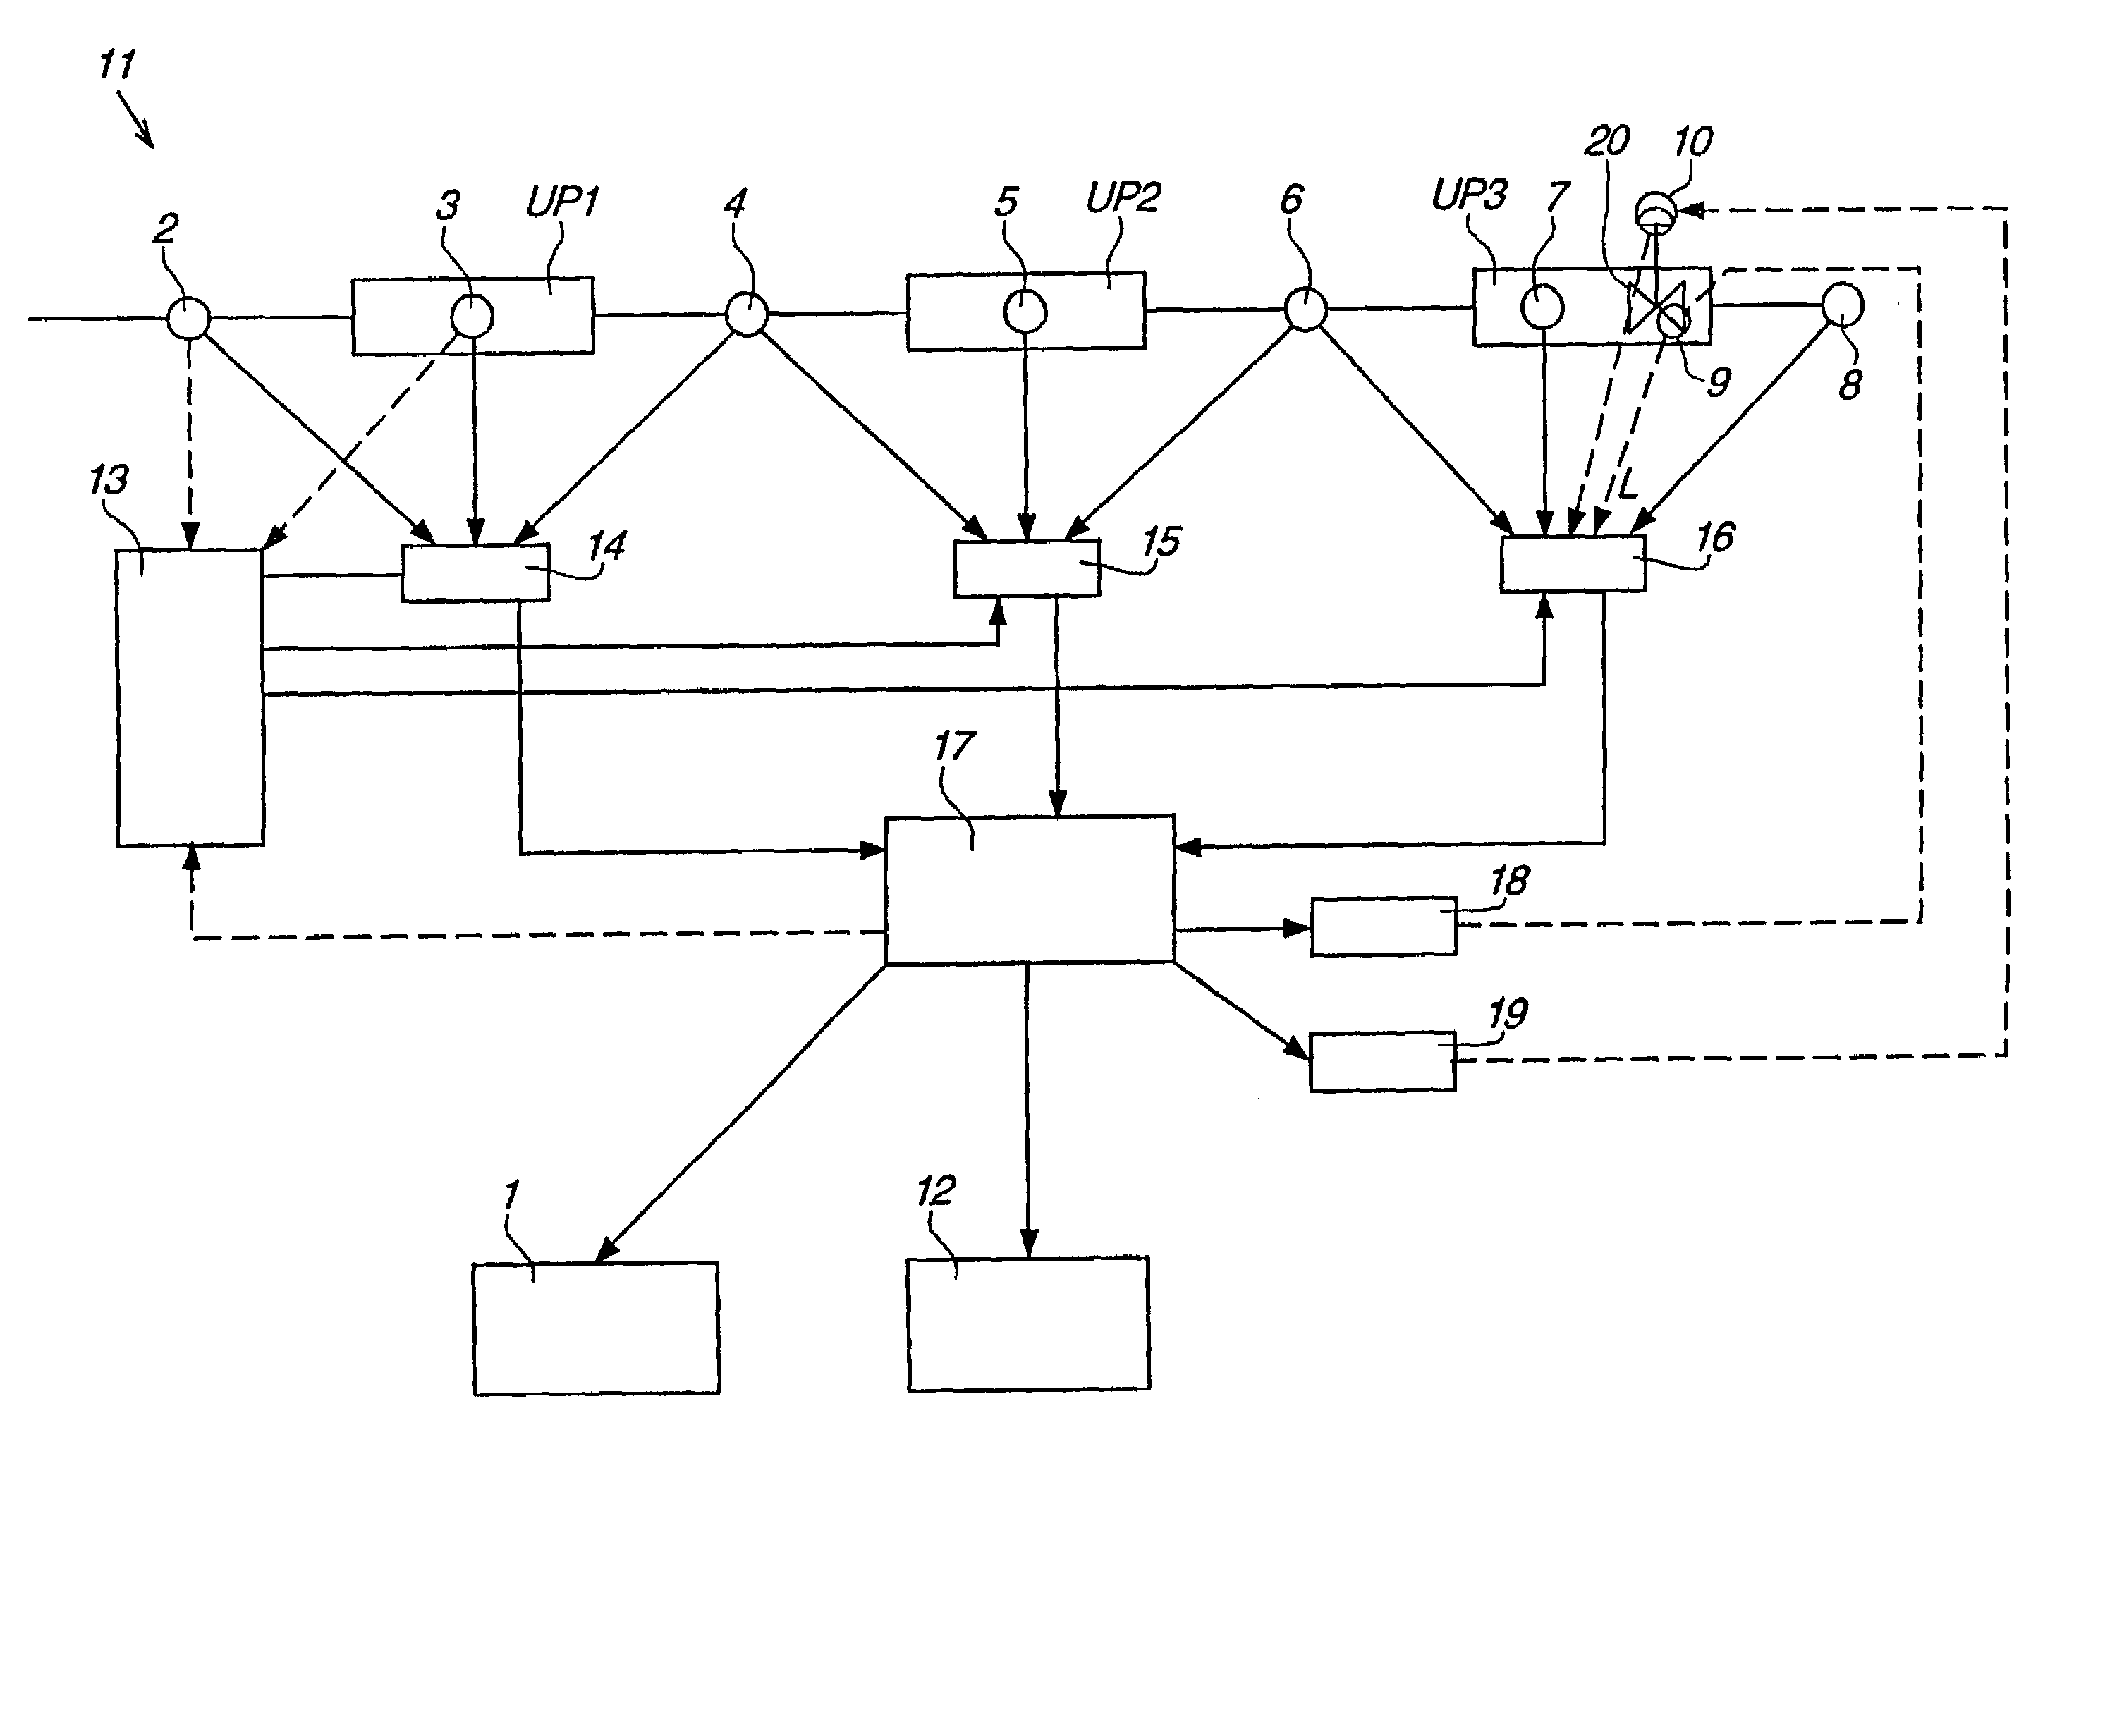 Computer based method and system for controlling an industrial process